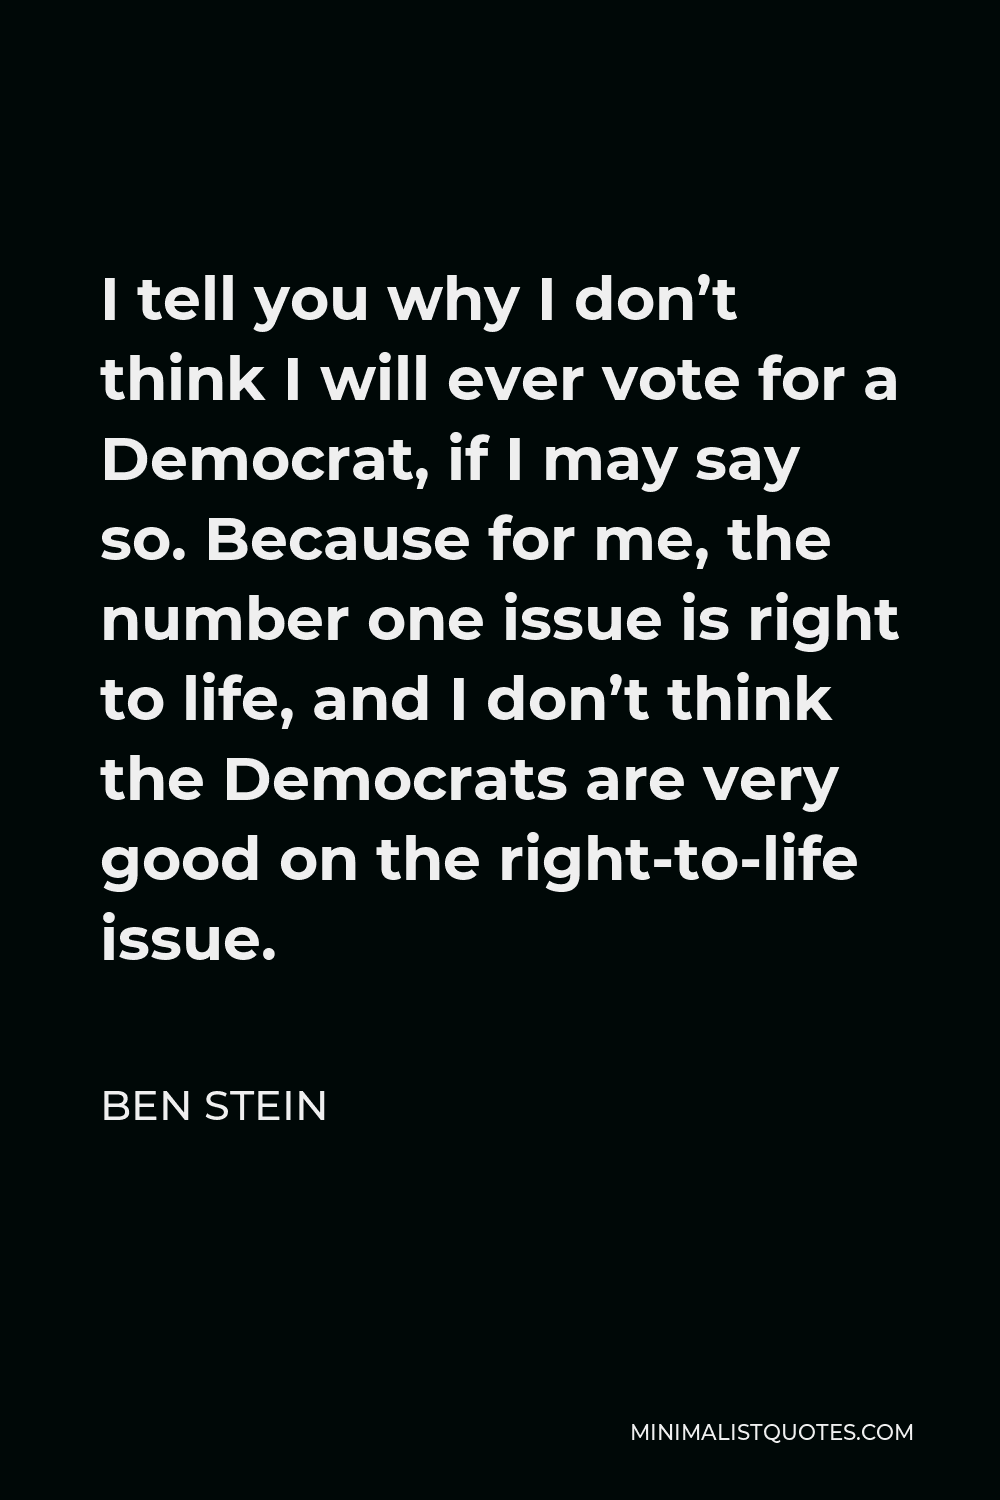 Ben Stein Quote - I tell you why I don’t think I will ever vote for a Democrat, if I may say so. Because for me, the number one issue is right to life, and I don’t think the Democrats are very good on the right-to-life issue.